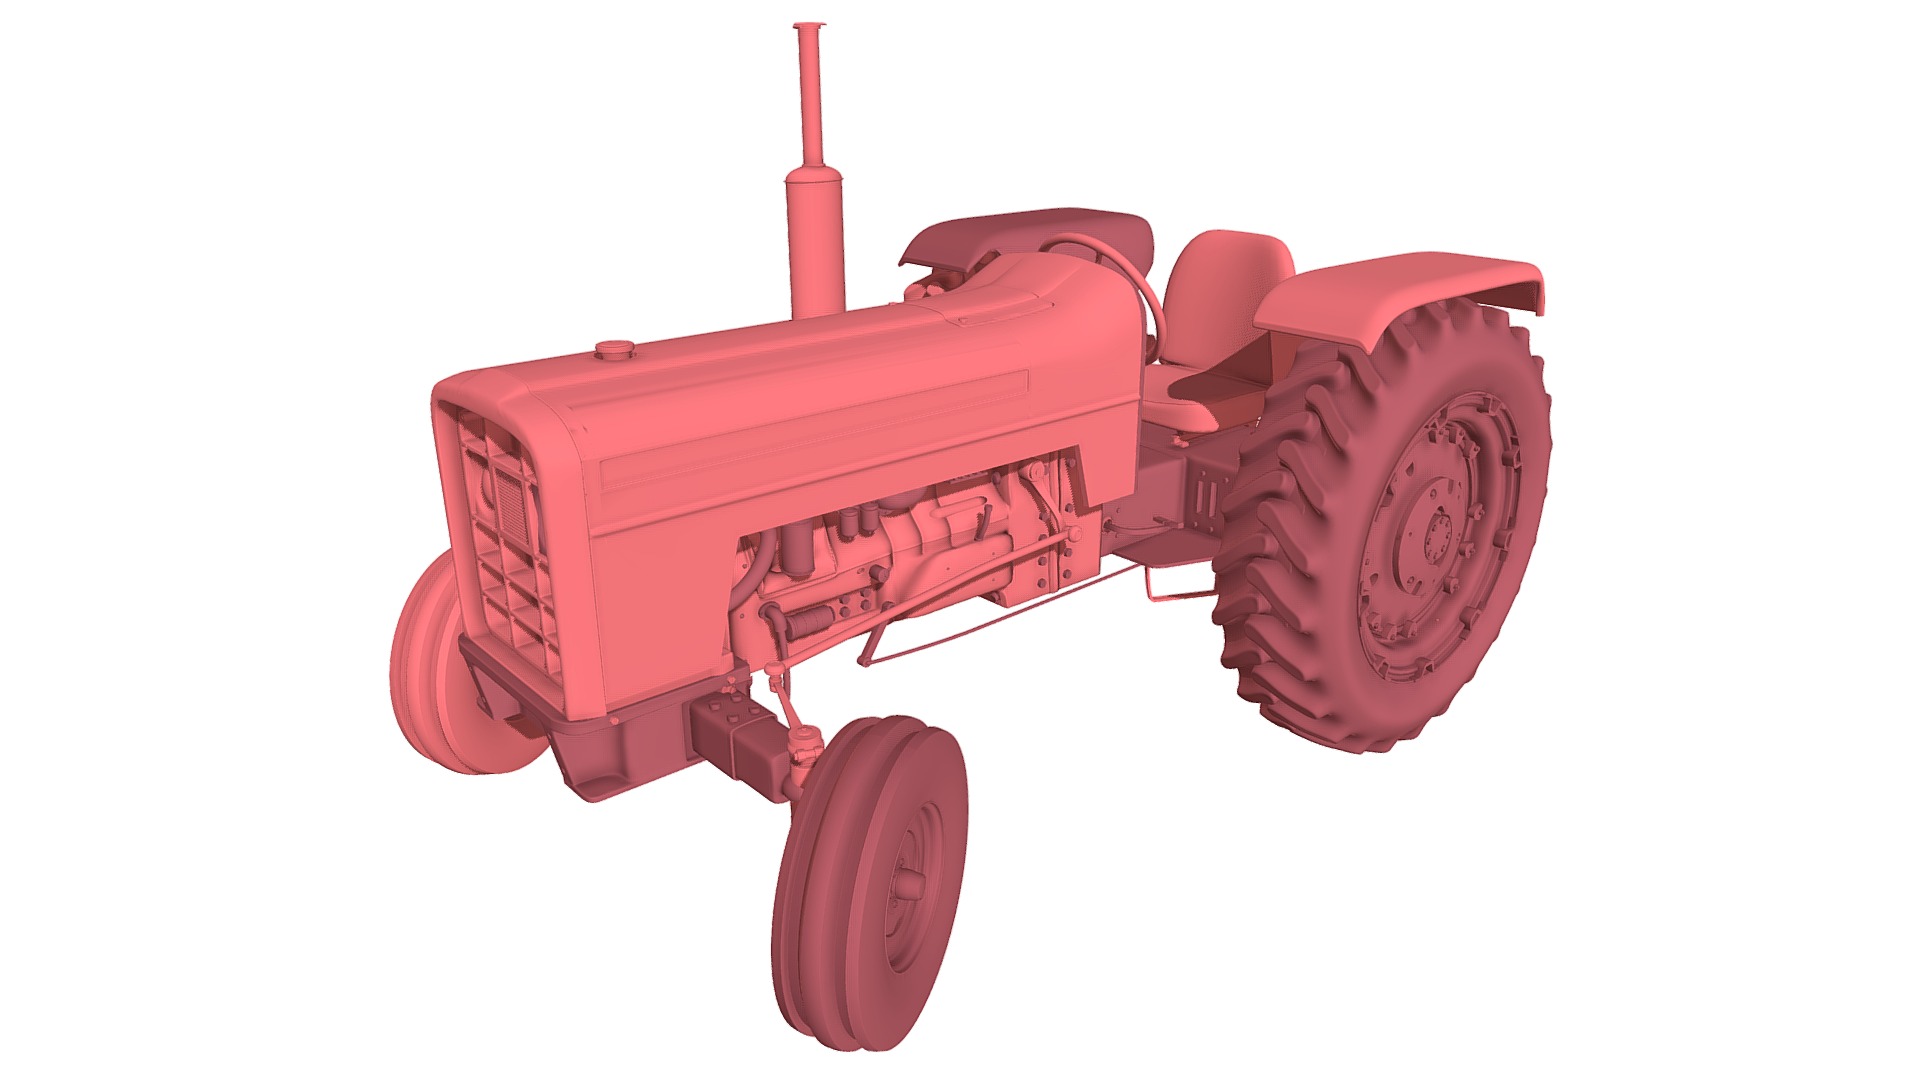 3D model Tractor - This is a 3D model of the Tractor. The 3D model is about a red and black tractor.